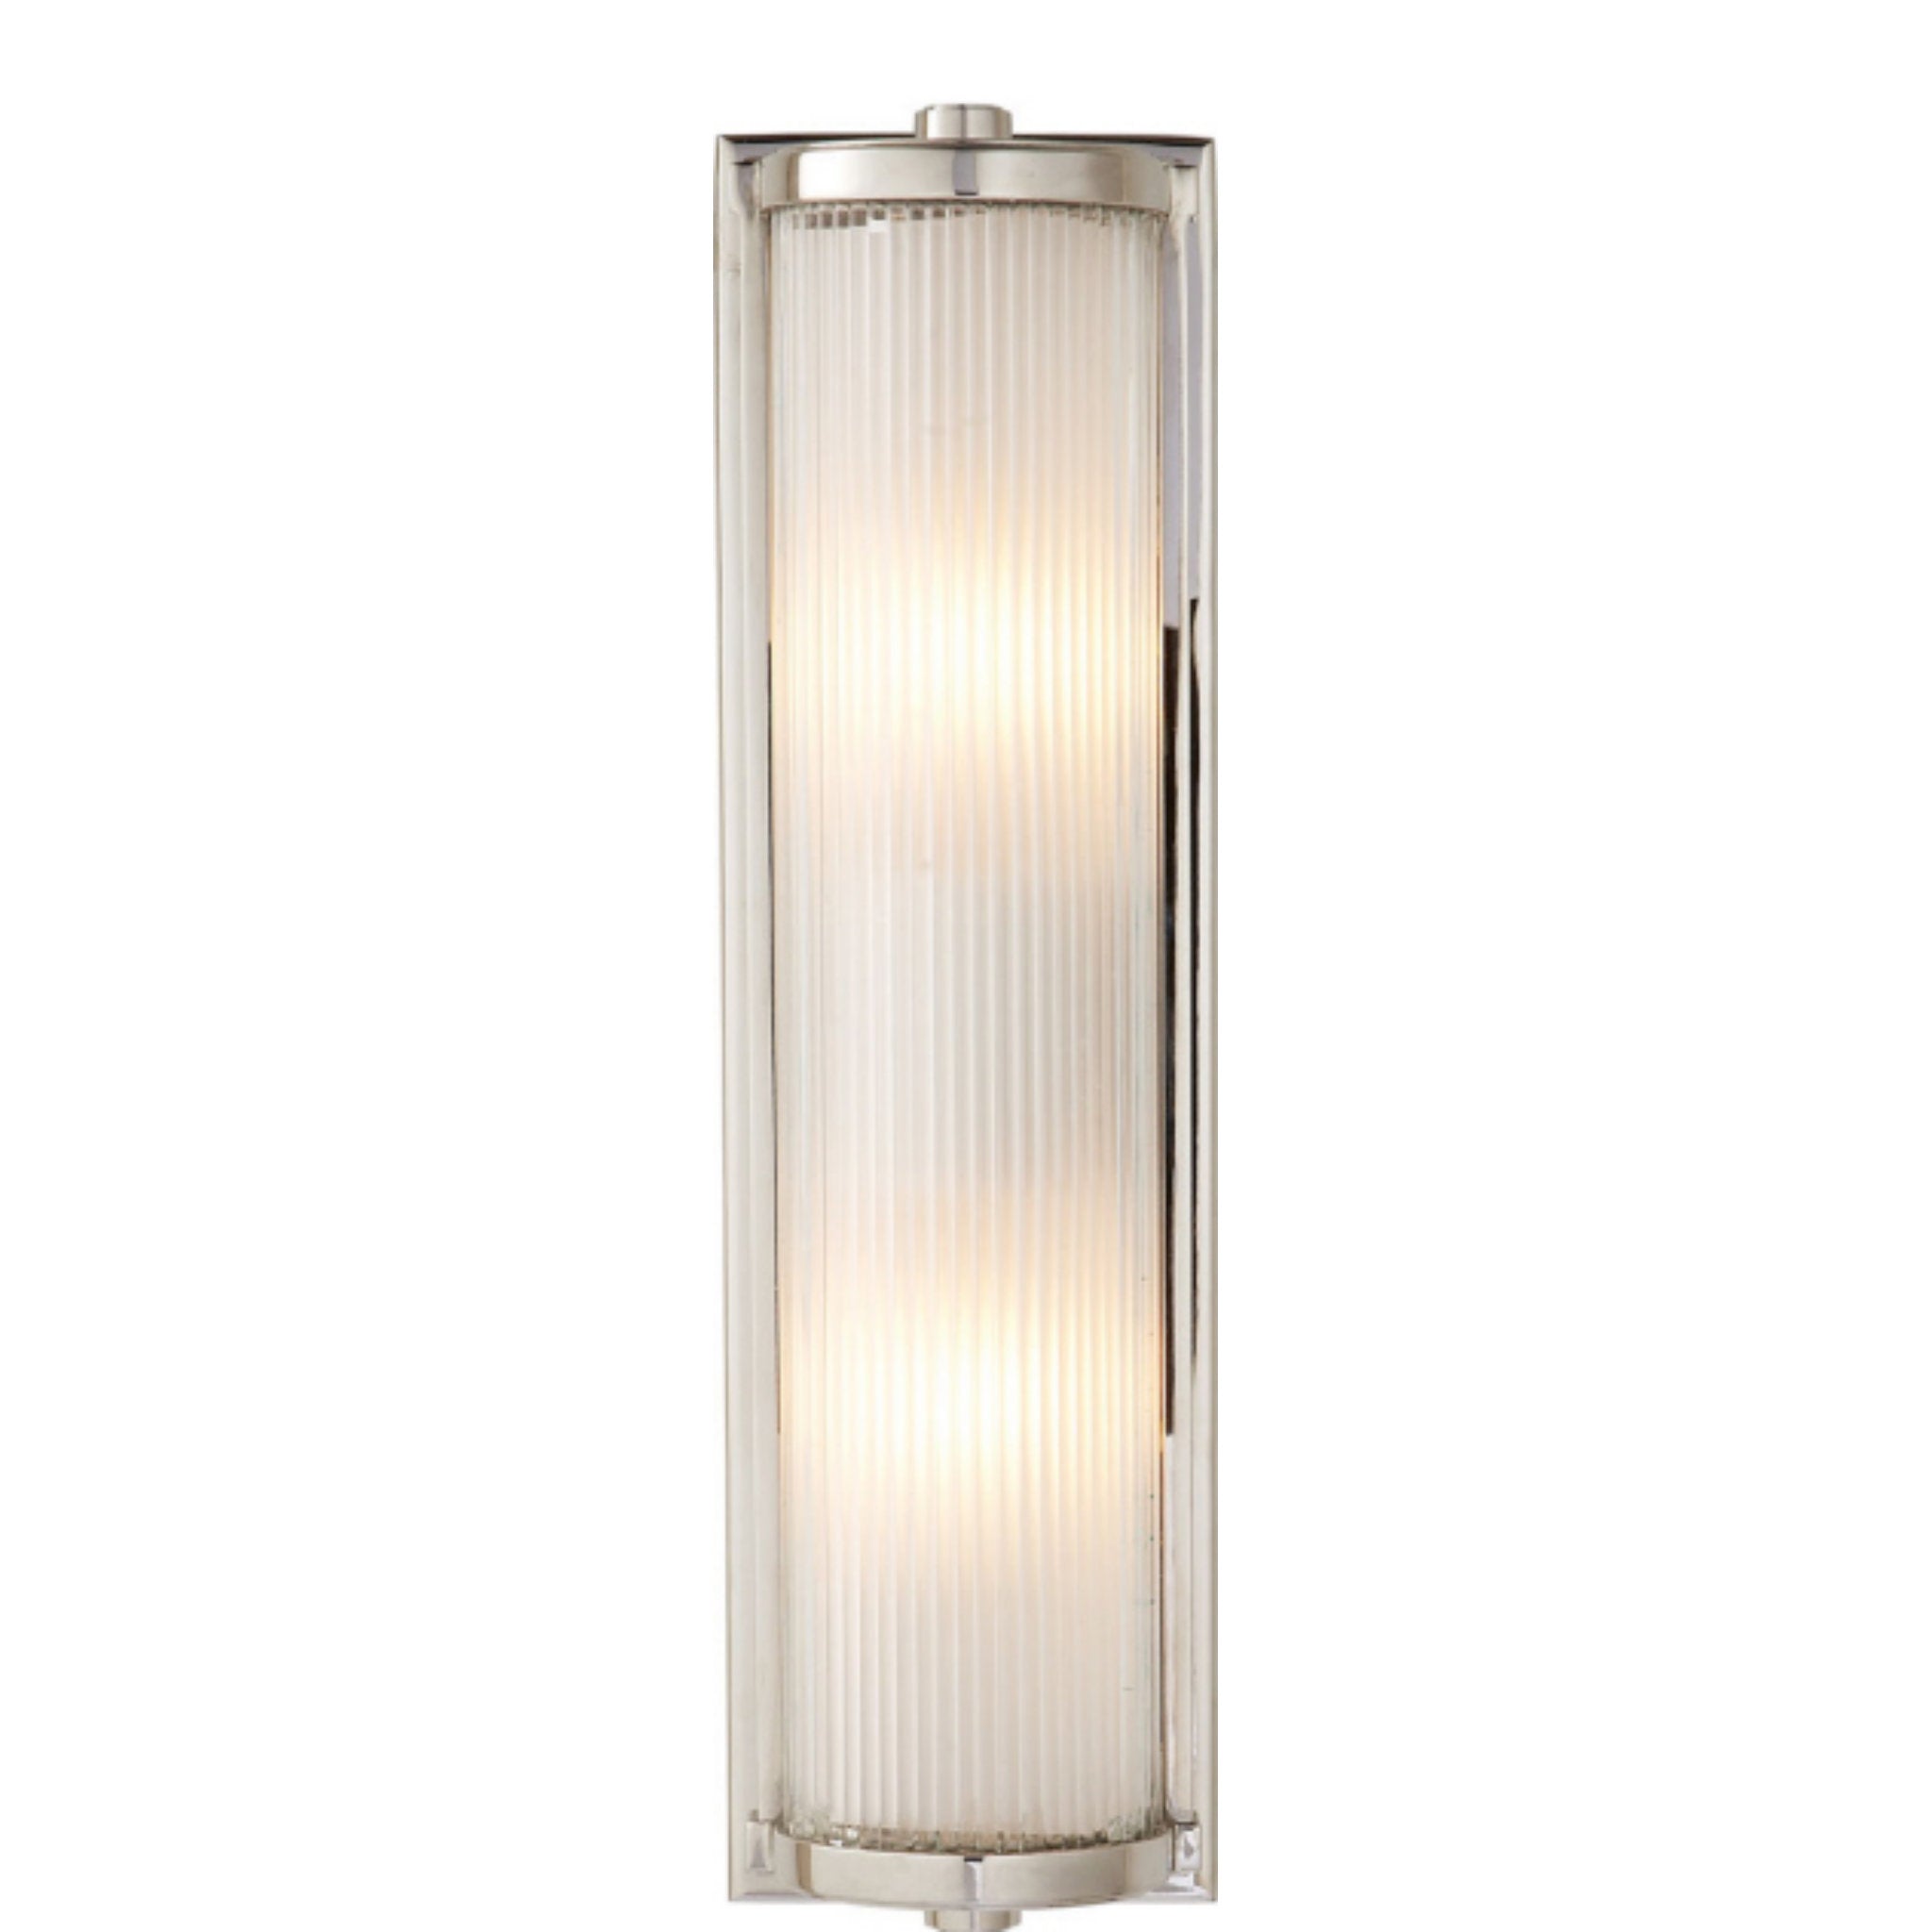 Thomas O'Brien Dresser Long Glass Rod Light in Polished Nickel with Frosted Glass Liner Open Box